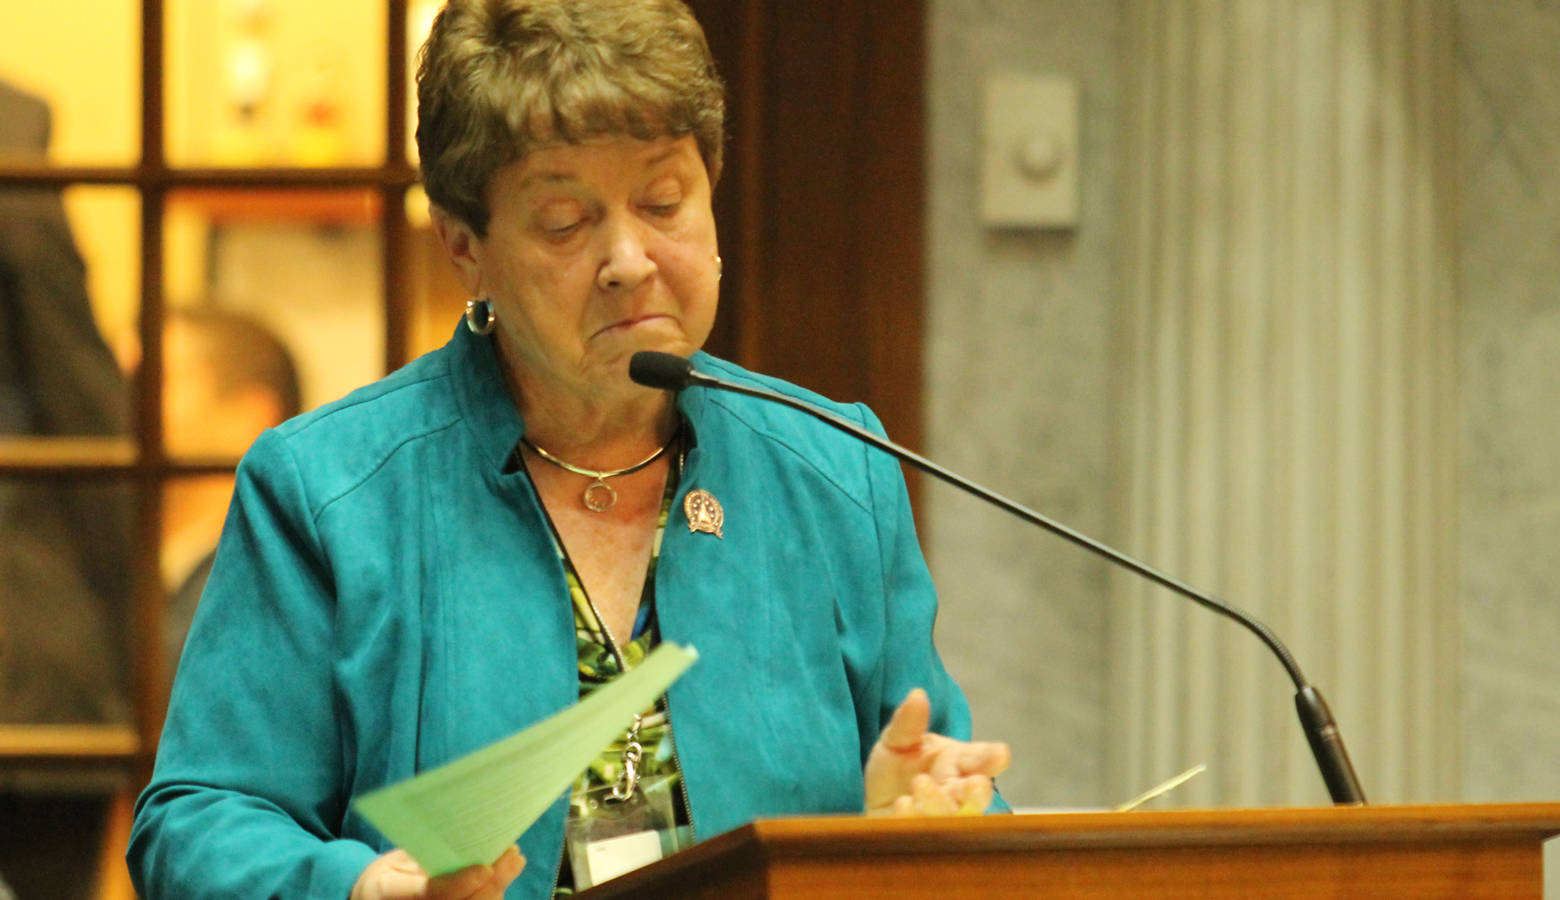 Lawmakers passed legislation last year to ensure cursive writing remains an option for schools, after Sen. Jean Leising’s bill to require it failed to meet key legislative deadlines. (Lauren Chapman/IPB News)